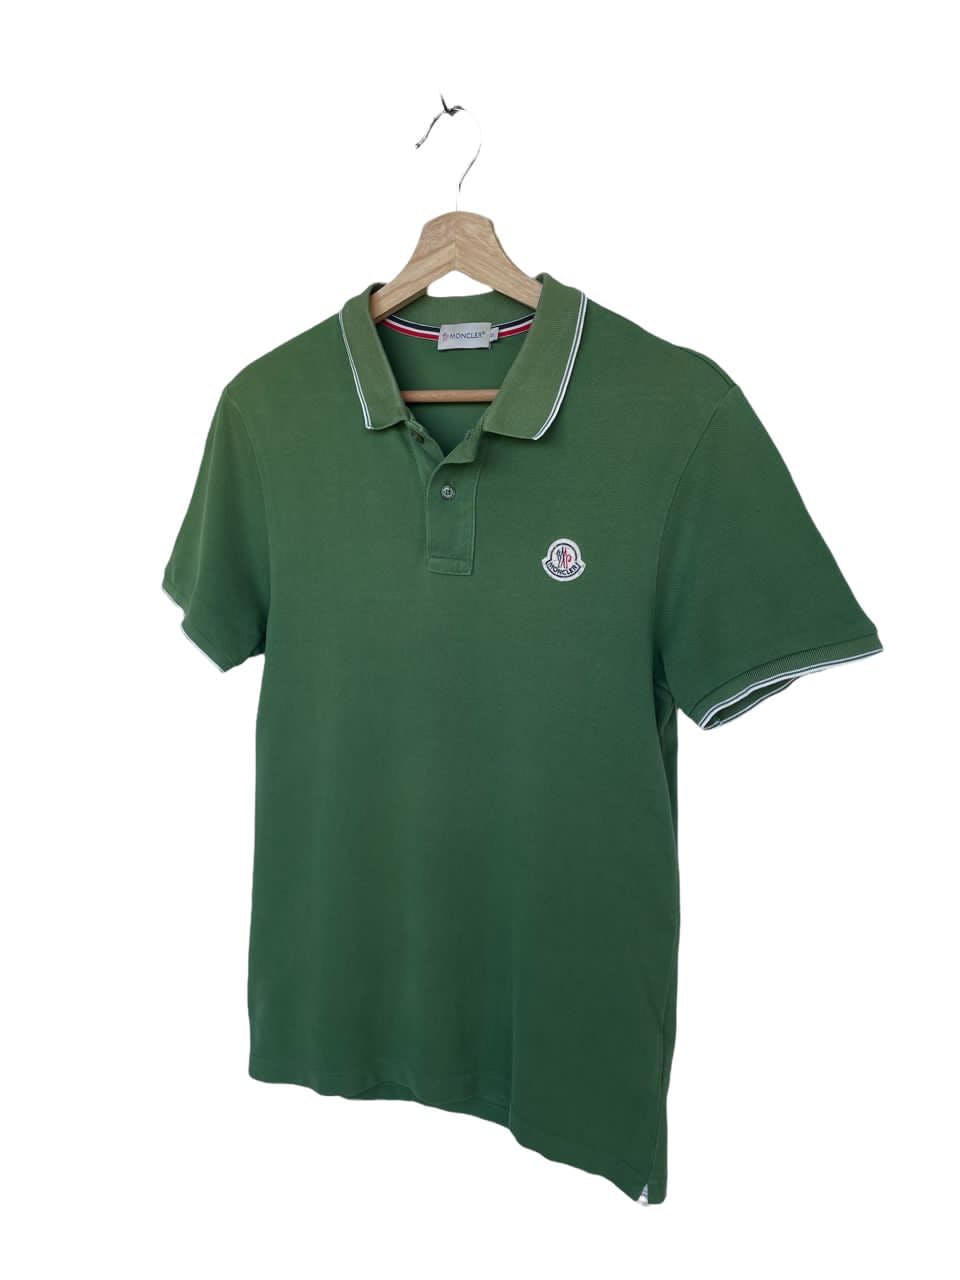 Authentic!! Moncler Ringer Button up Polo Shirt - 3